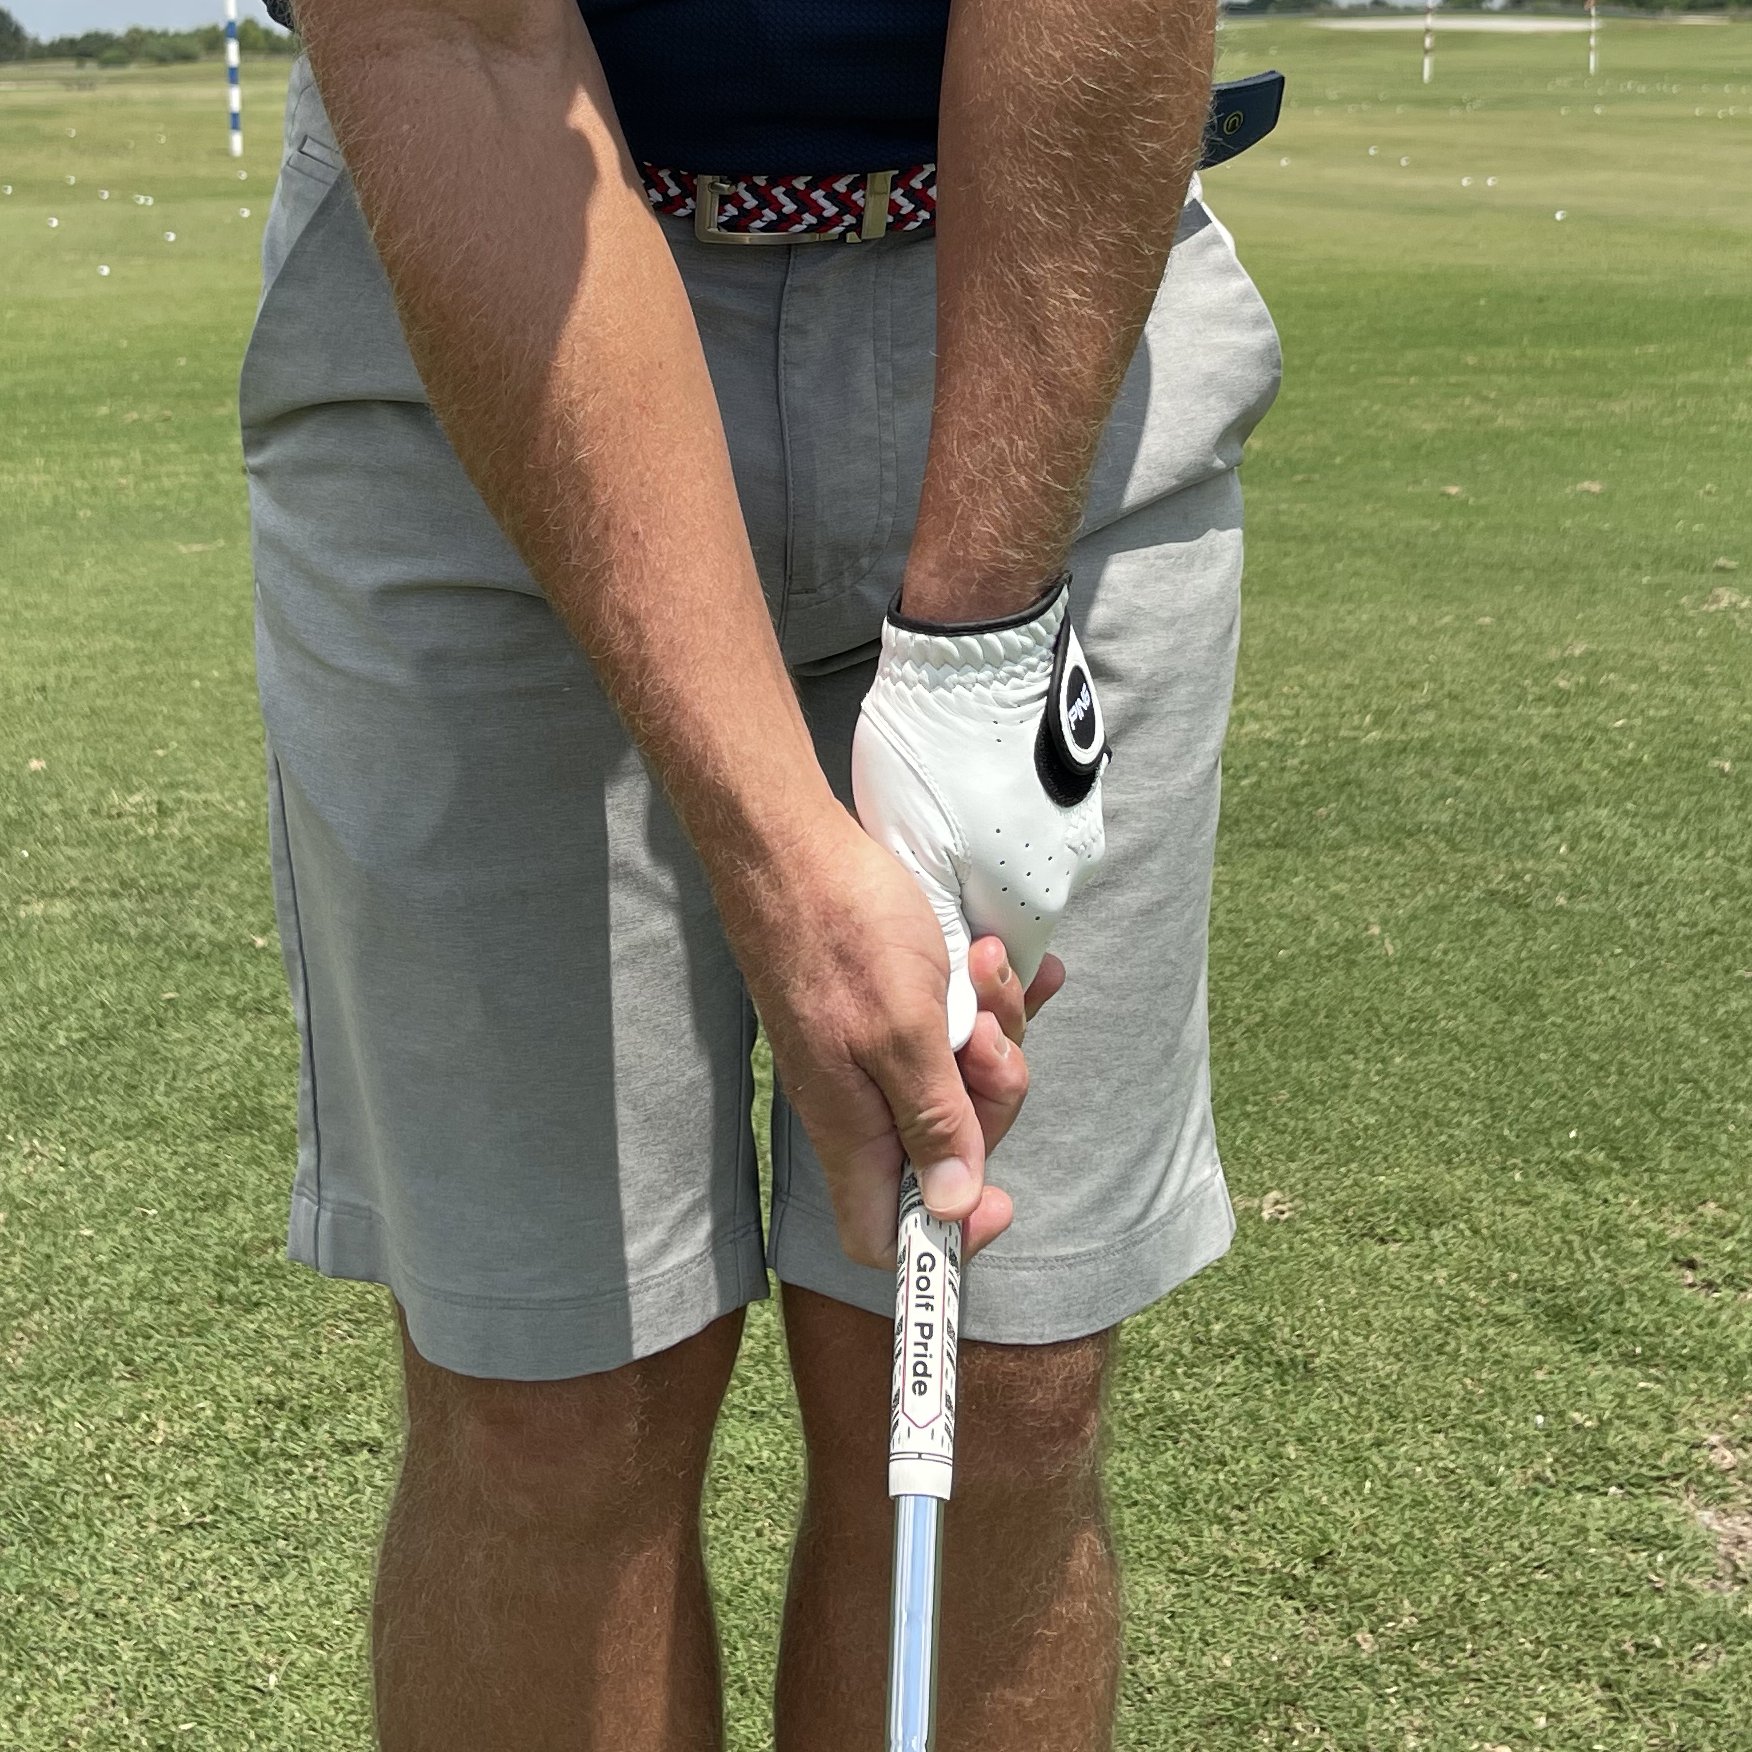 Golf Grip cheat sheet: Do you have the correct grip for your swing